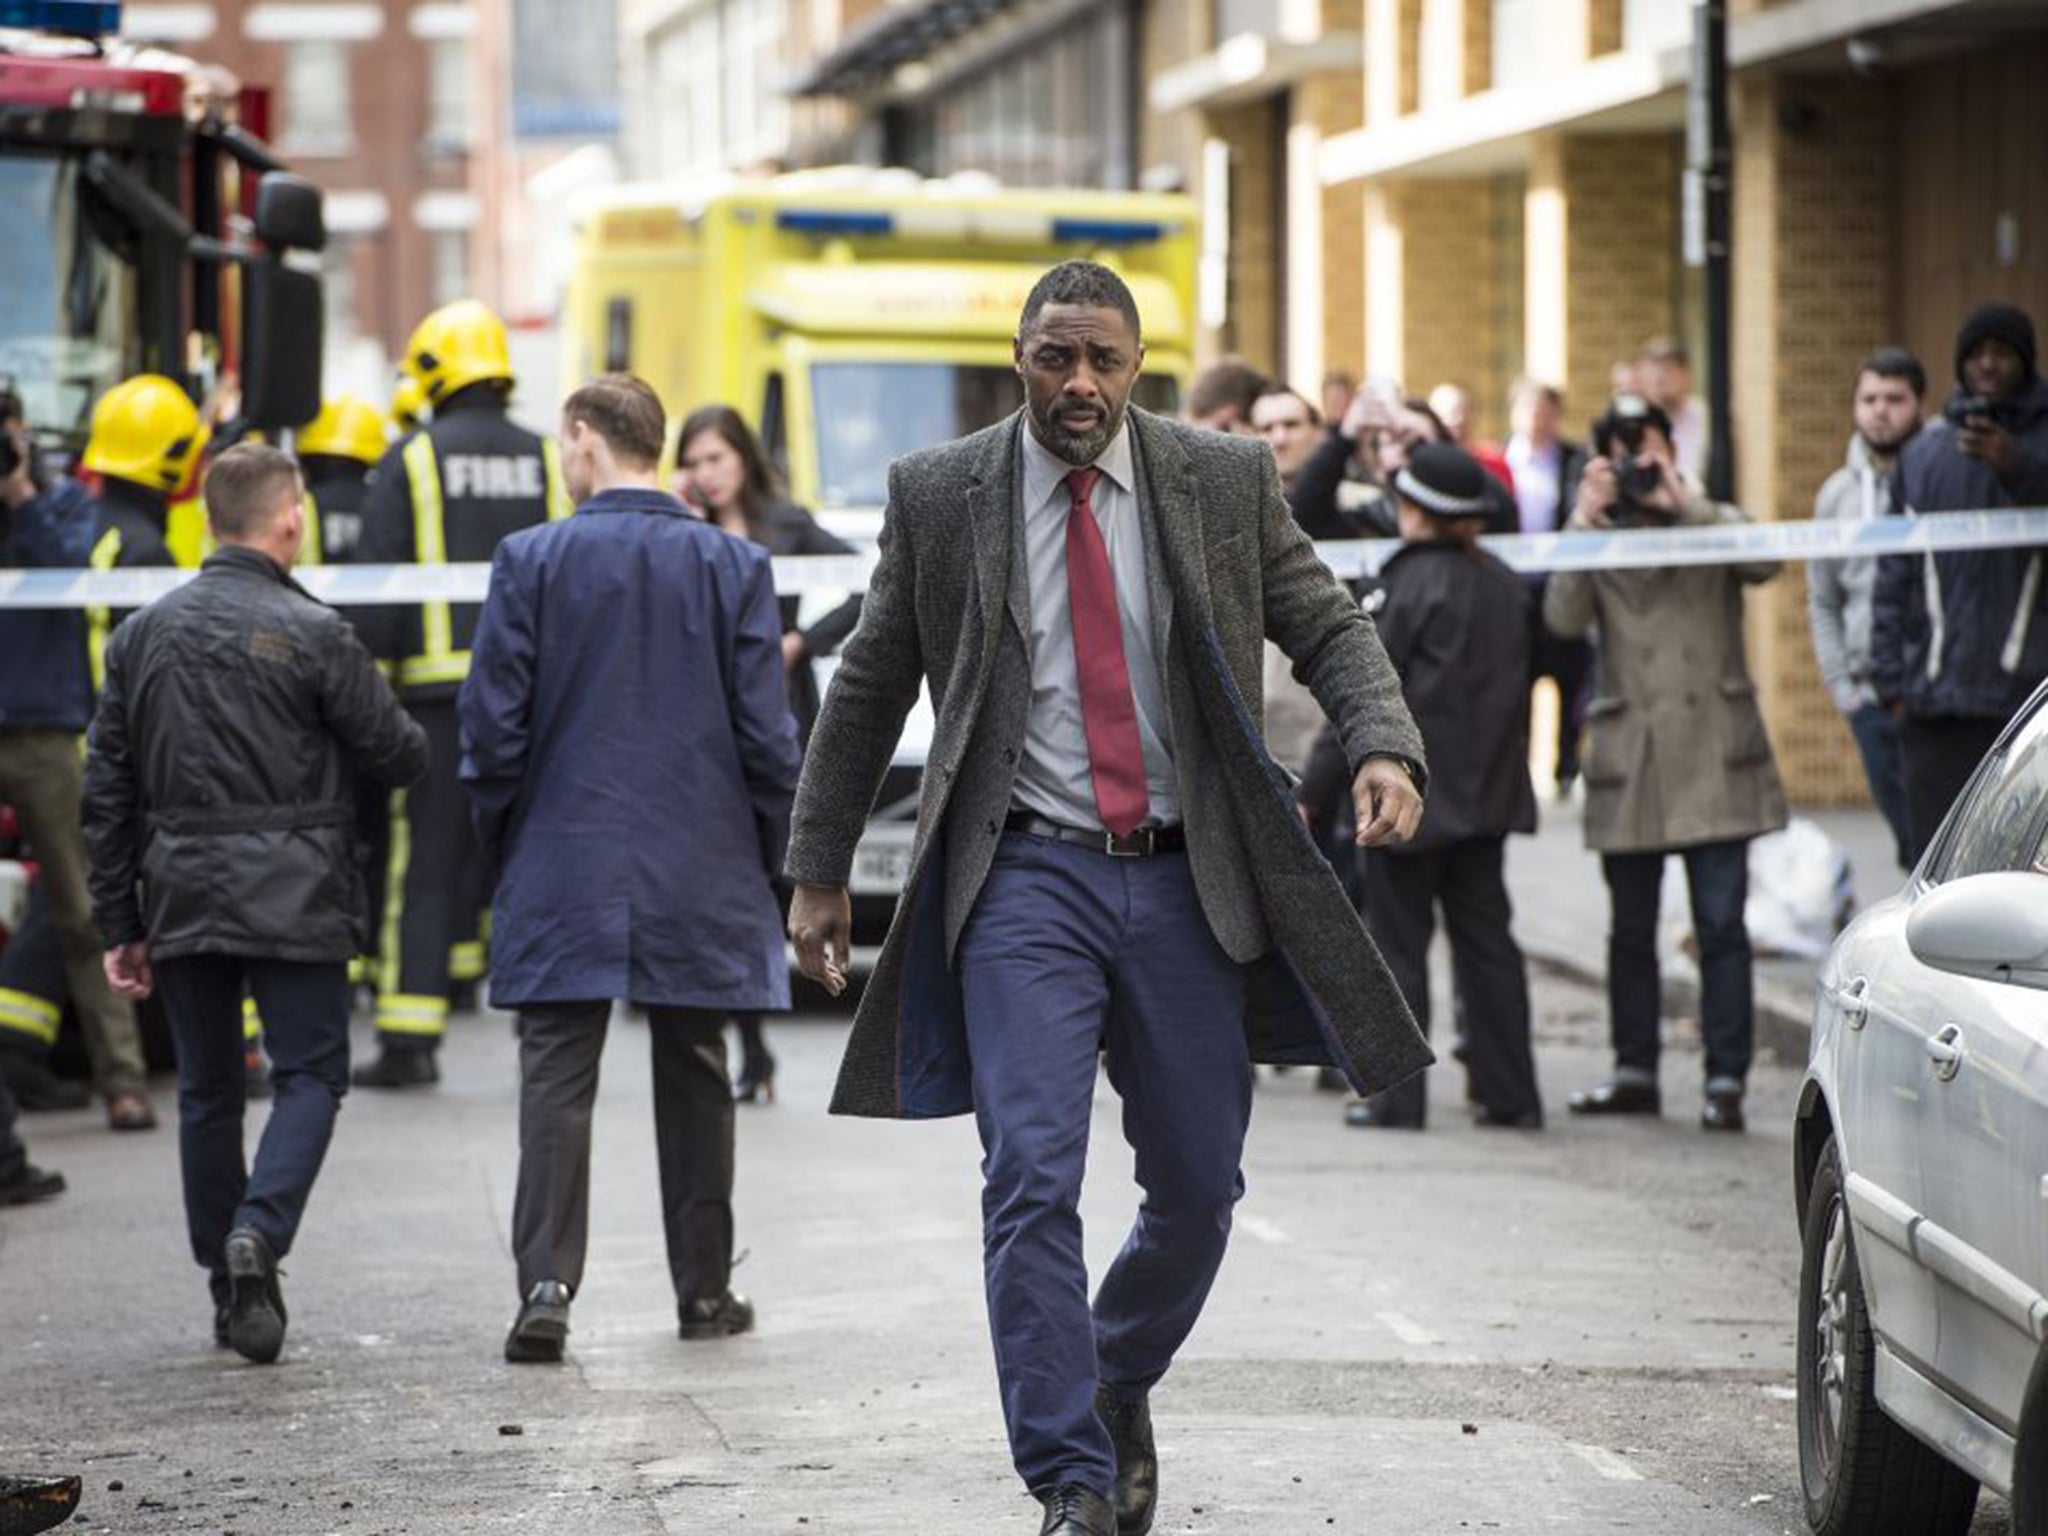 Idris Elba is nominated in the Best Supporting Actor supporting category for Luther